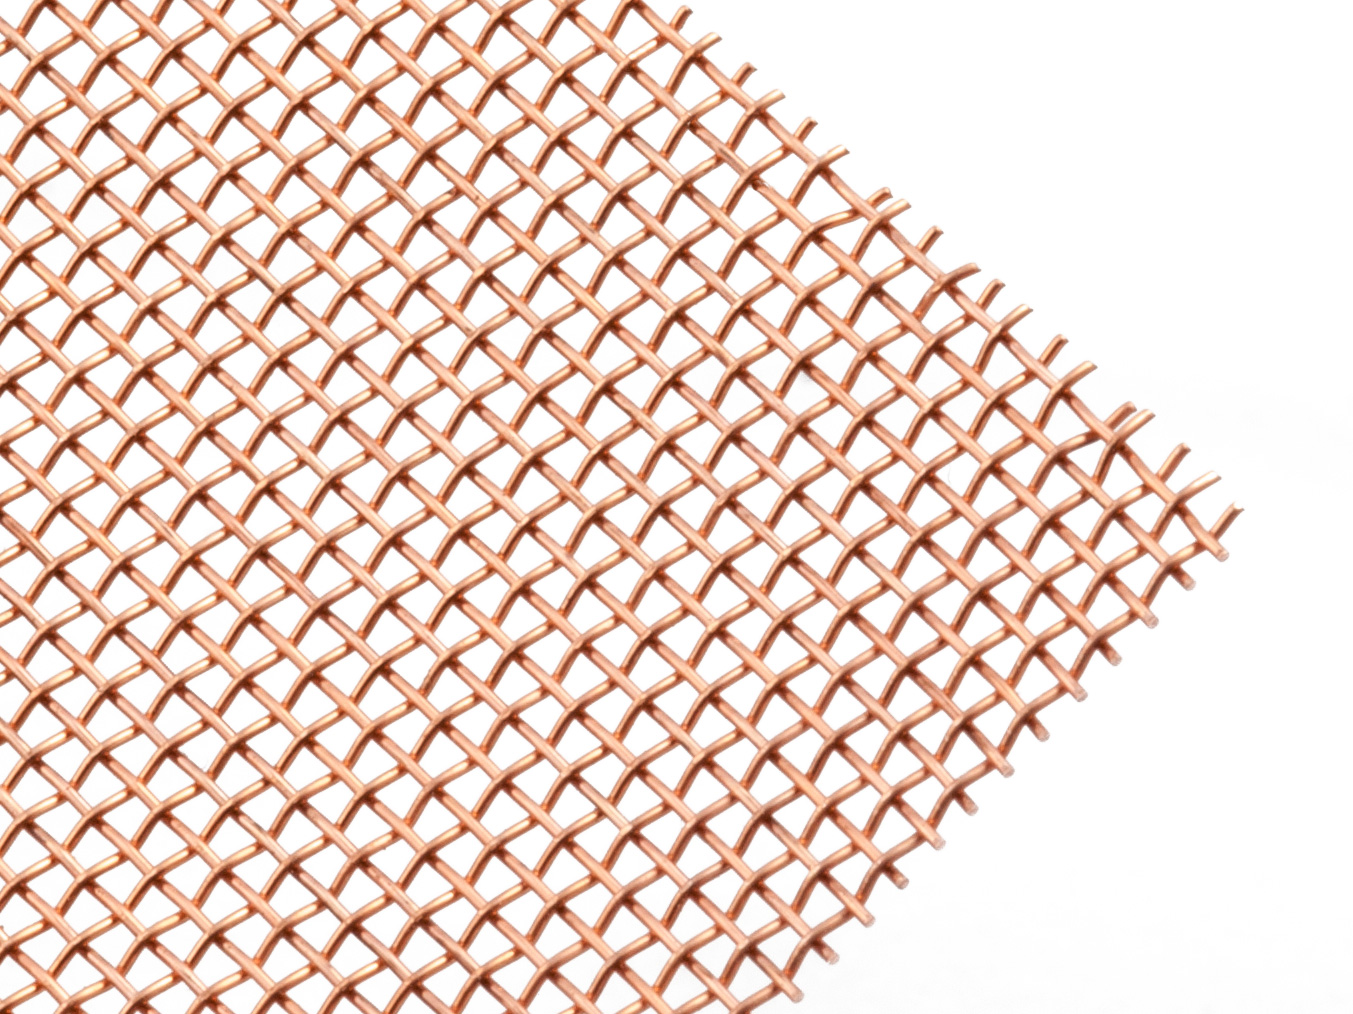  LFFH Copper Mesh Screen, Fine Wire Mesh Metal Mesh Radiation  Protection Copper for Dense Filter Screen Mesh Clean DIY Fill Fabric for  Home Factory (Color : Copper 2mesh, Size : 1x0.914m) 